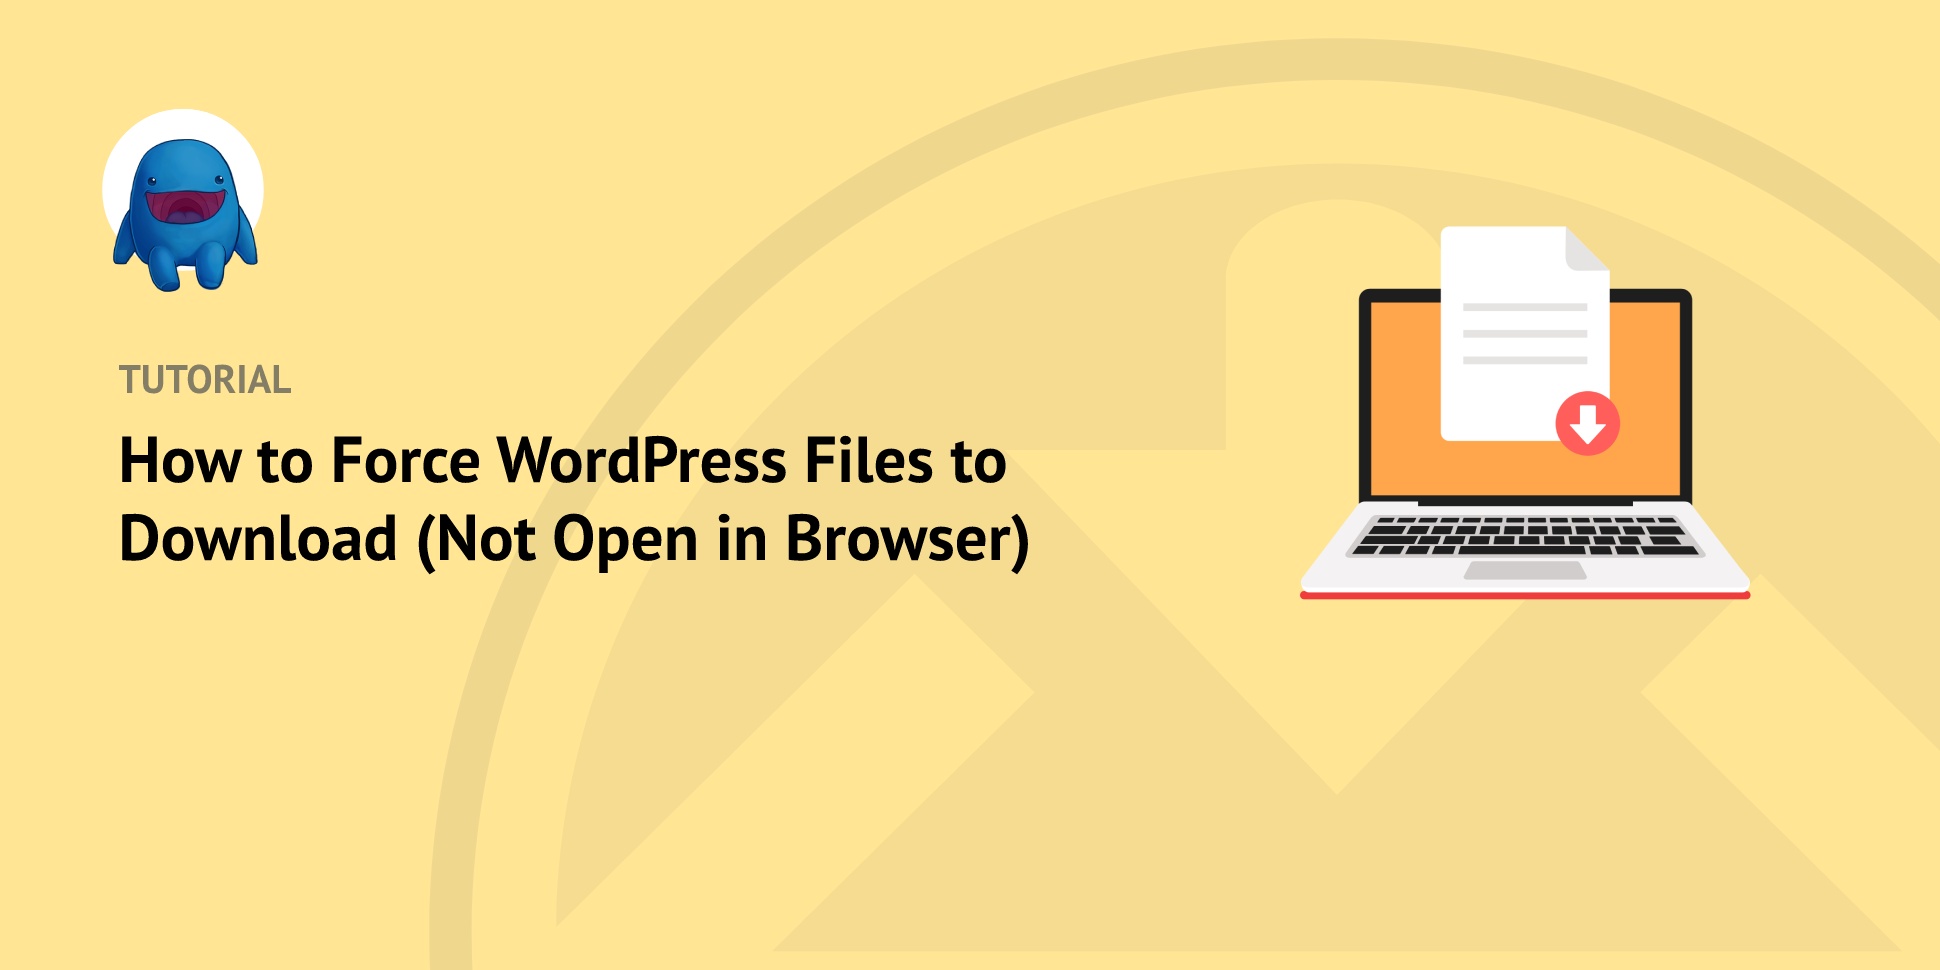 How to Force WordPress Files to Download (Not Open in Browser)